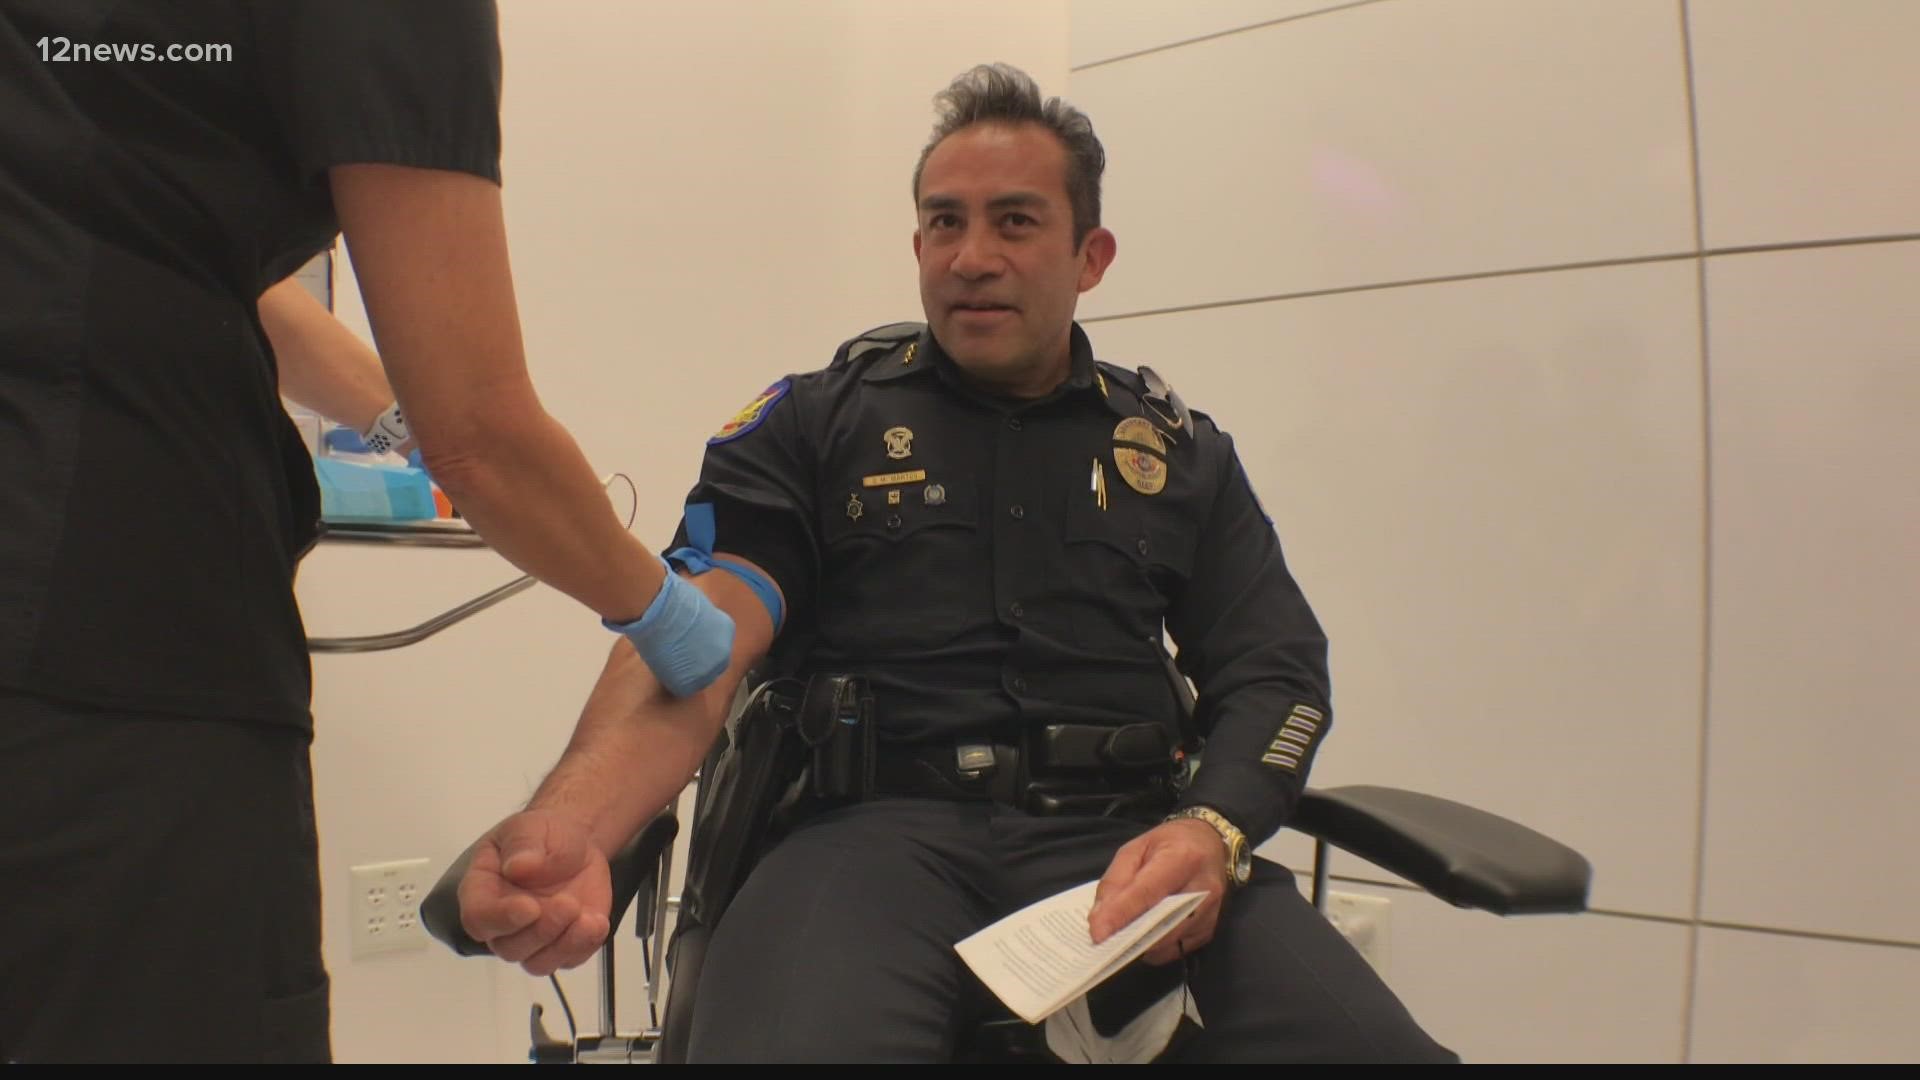 "Gallery" is a first-of-its-kind blood test that can detect 50 different cancers early. It will hopefully help combat the increasing cancer rate among firefighters.